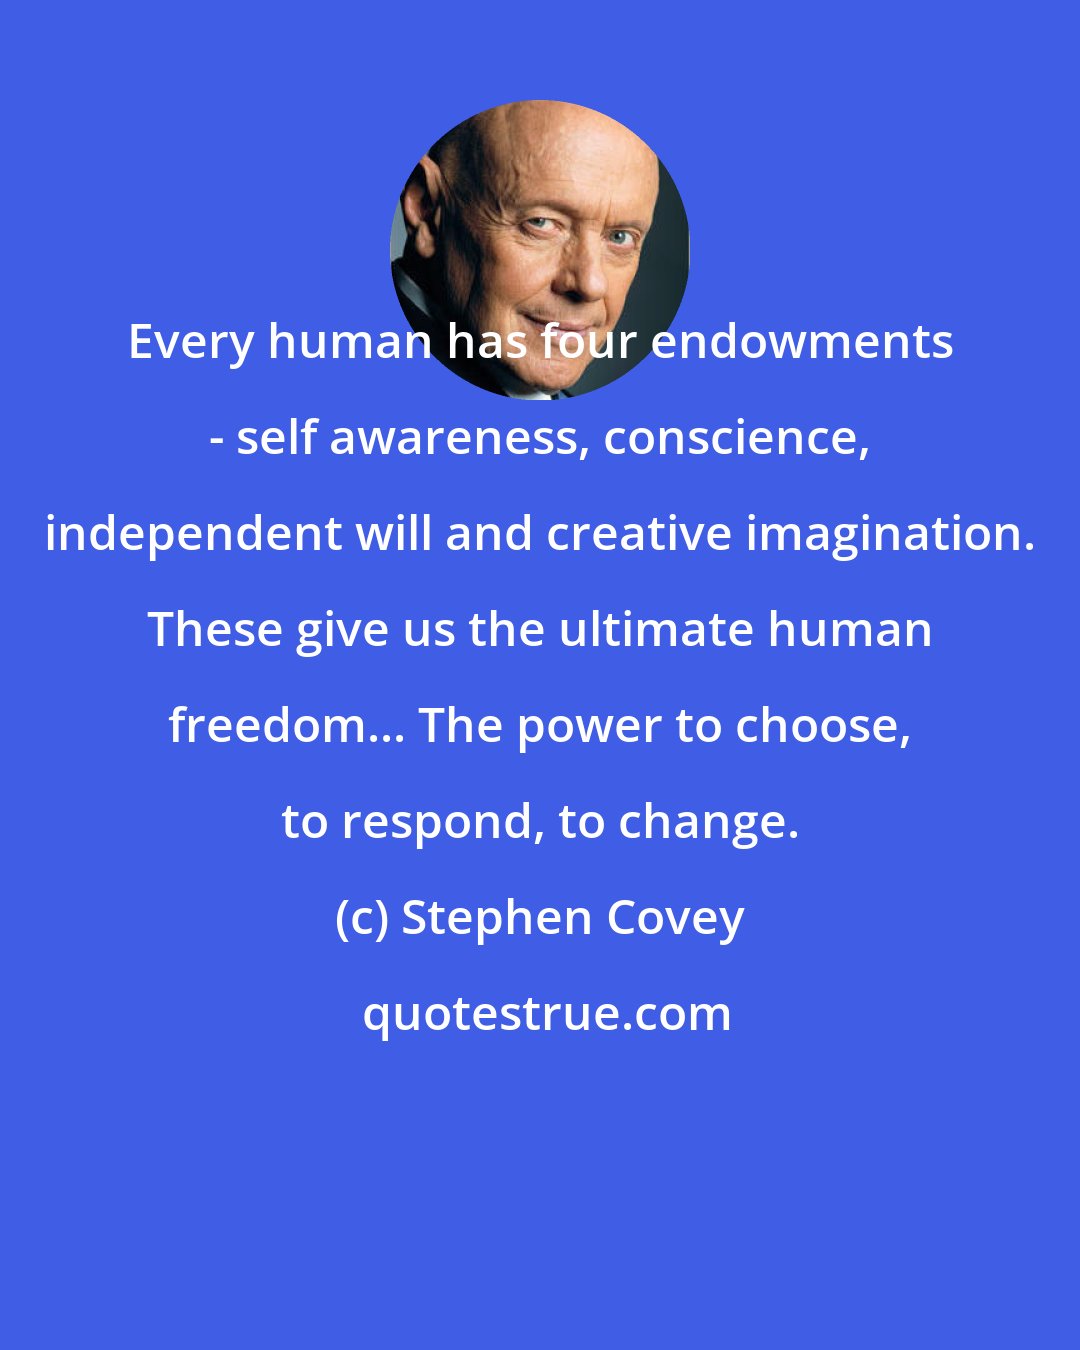 Stephen Covey: Every human has four endowments - self awareness, conscience, independent will and creative imagination. These give us the ultimate human freedom... The power to choose, to respond, to change.